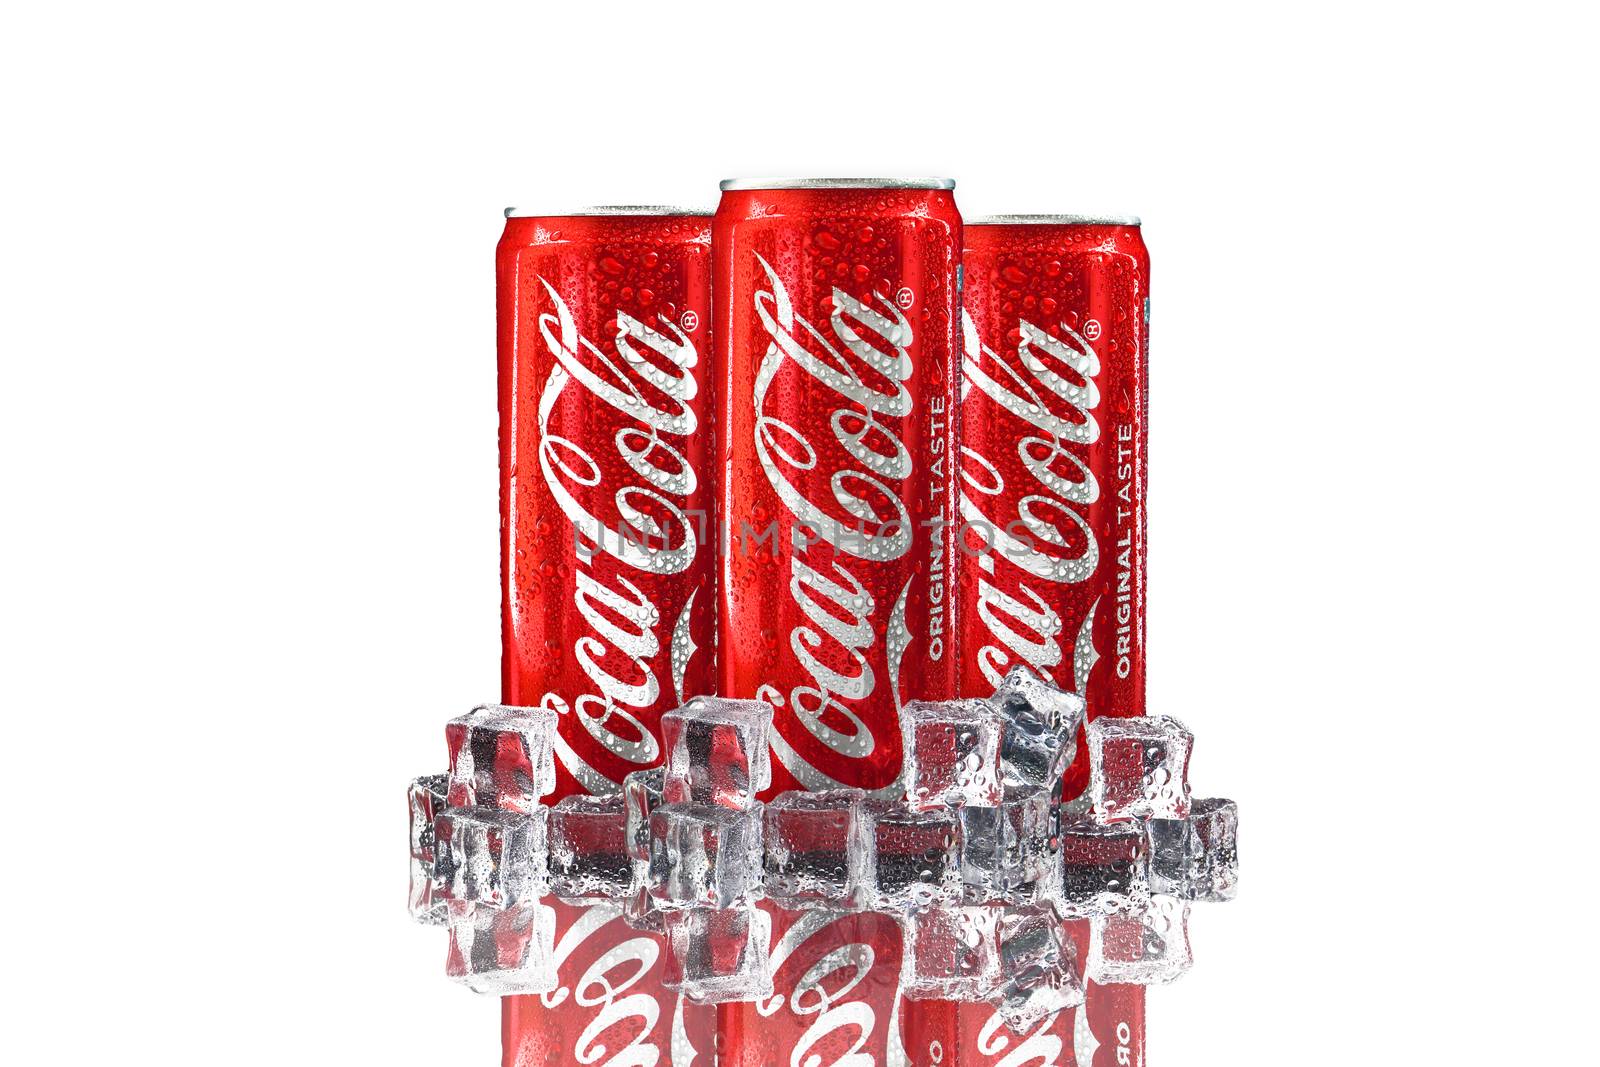 Kuala Lumpur, Malaysia - October 19, 2020 : Coca Cola or Coke Drink on white background by silverwings